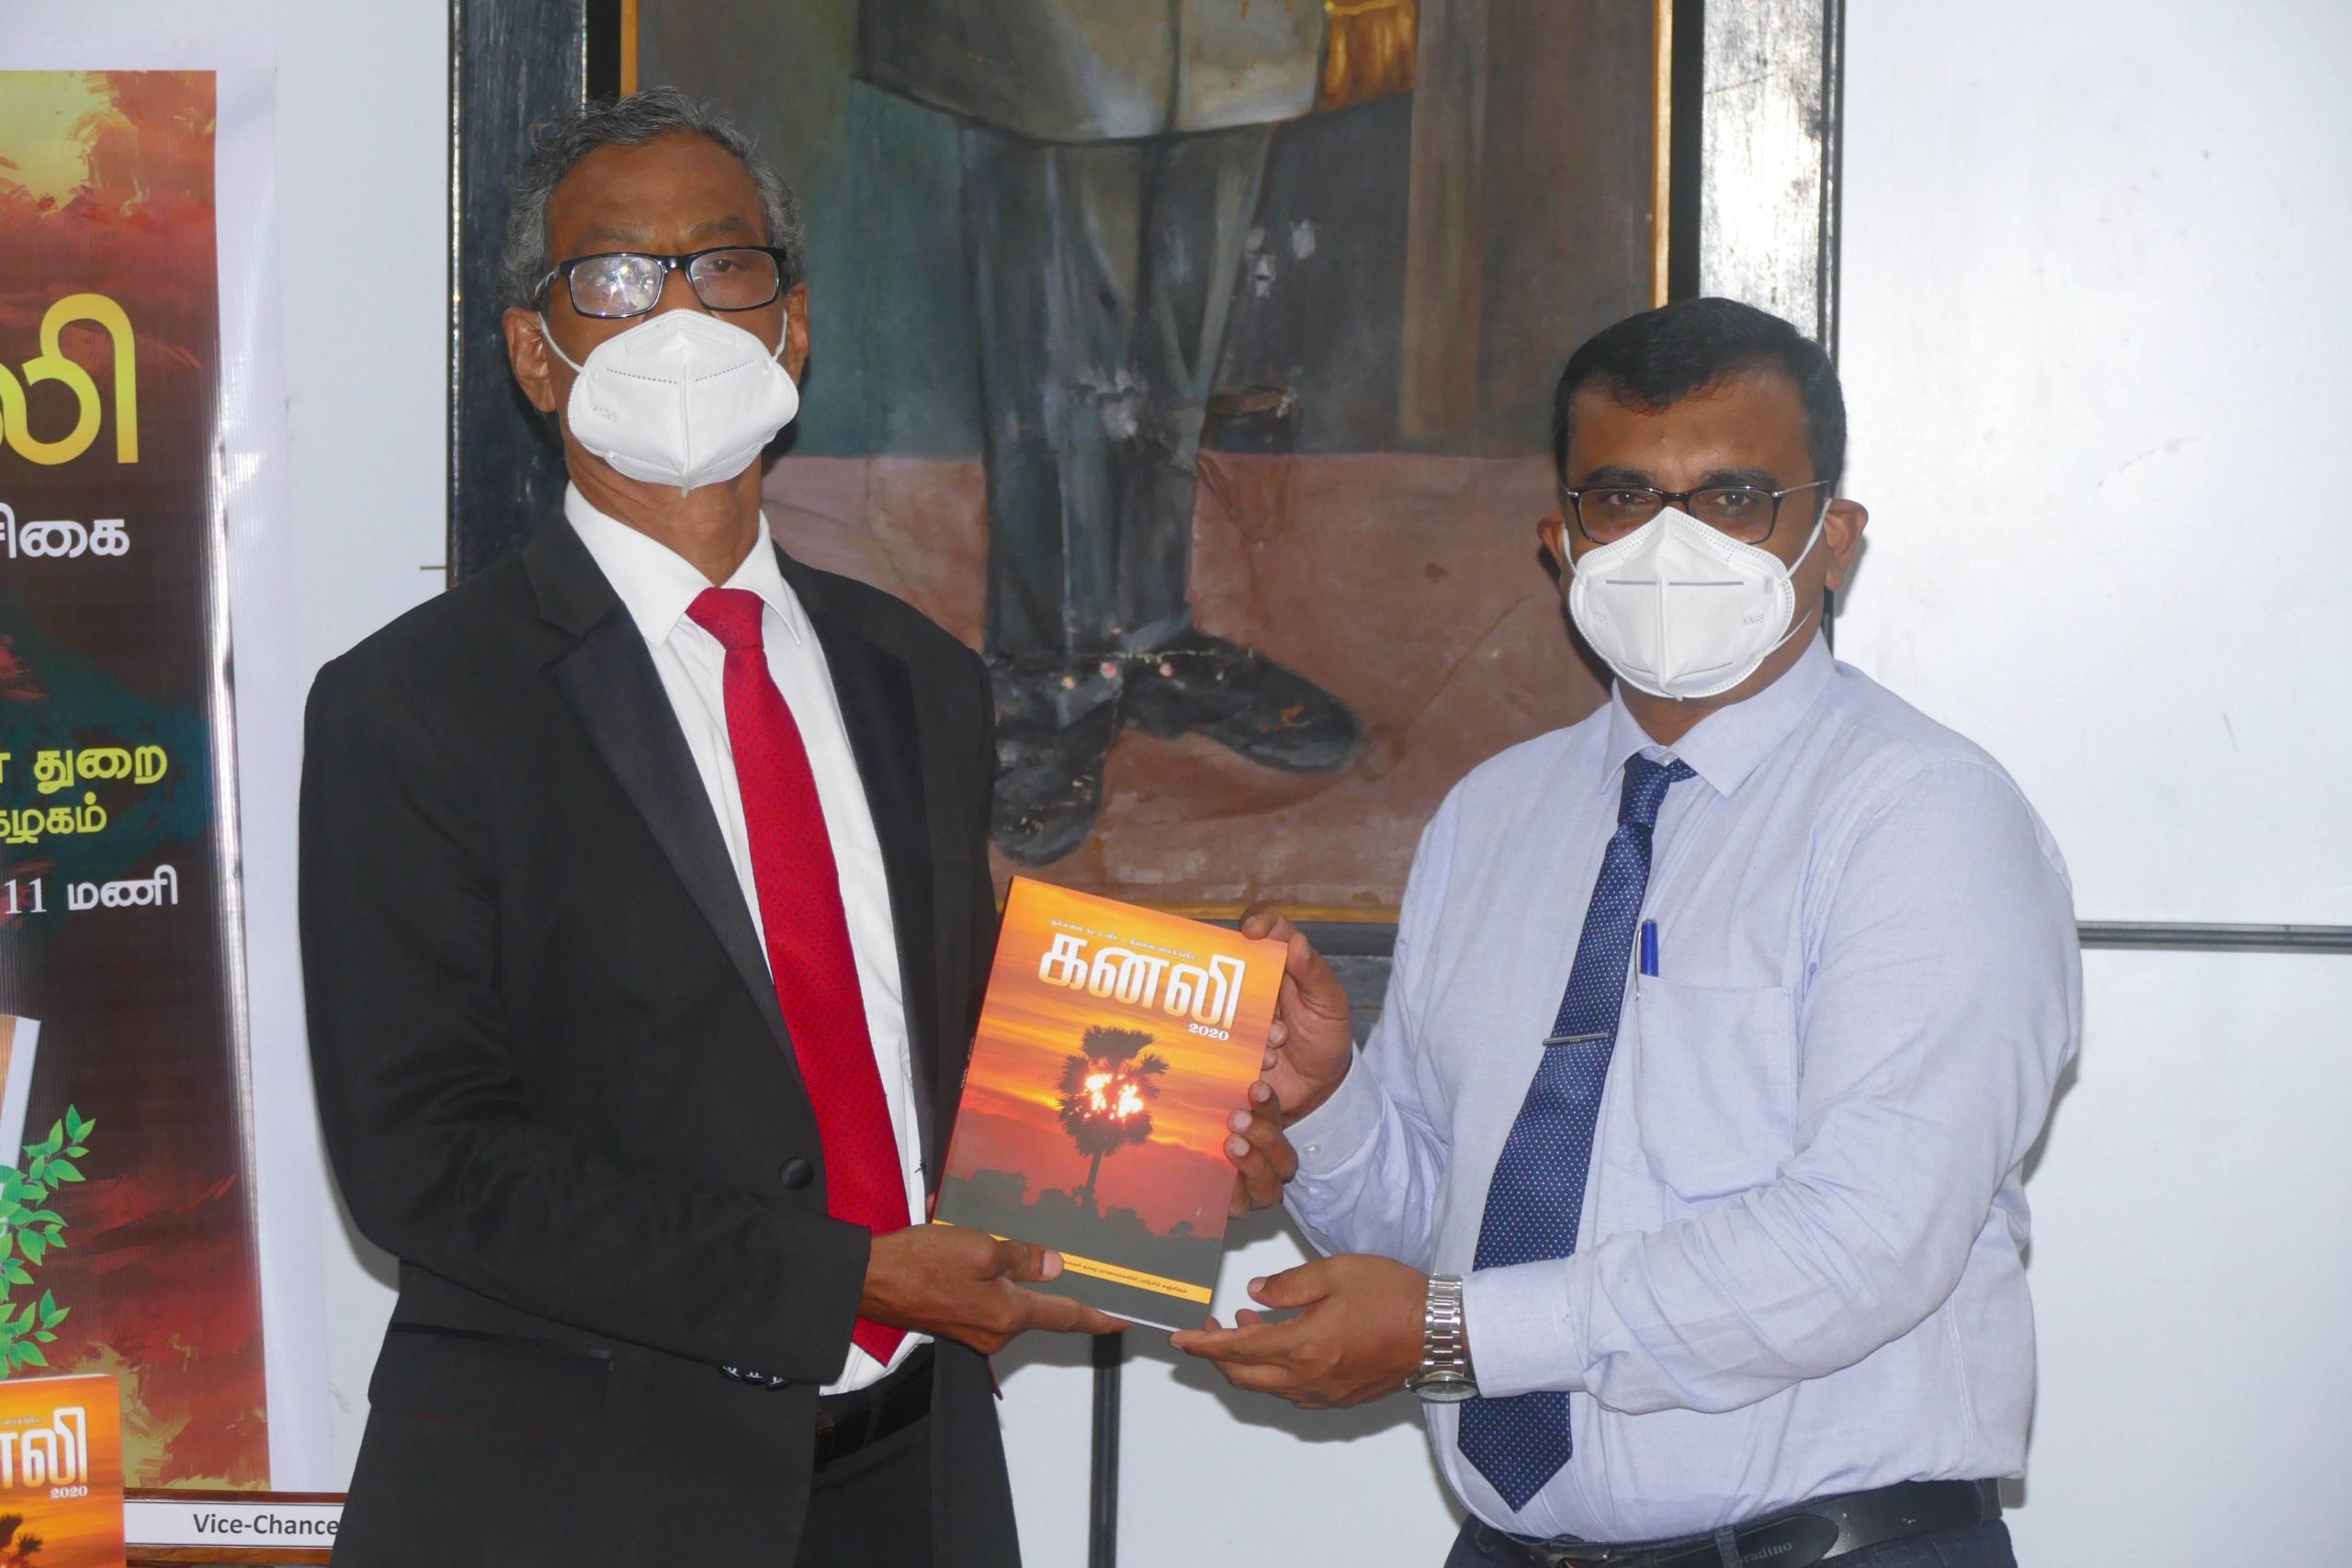 Read more about the article ‘Kanali’ Students’ Magazine Released by the Vice-Chancellor